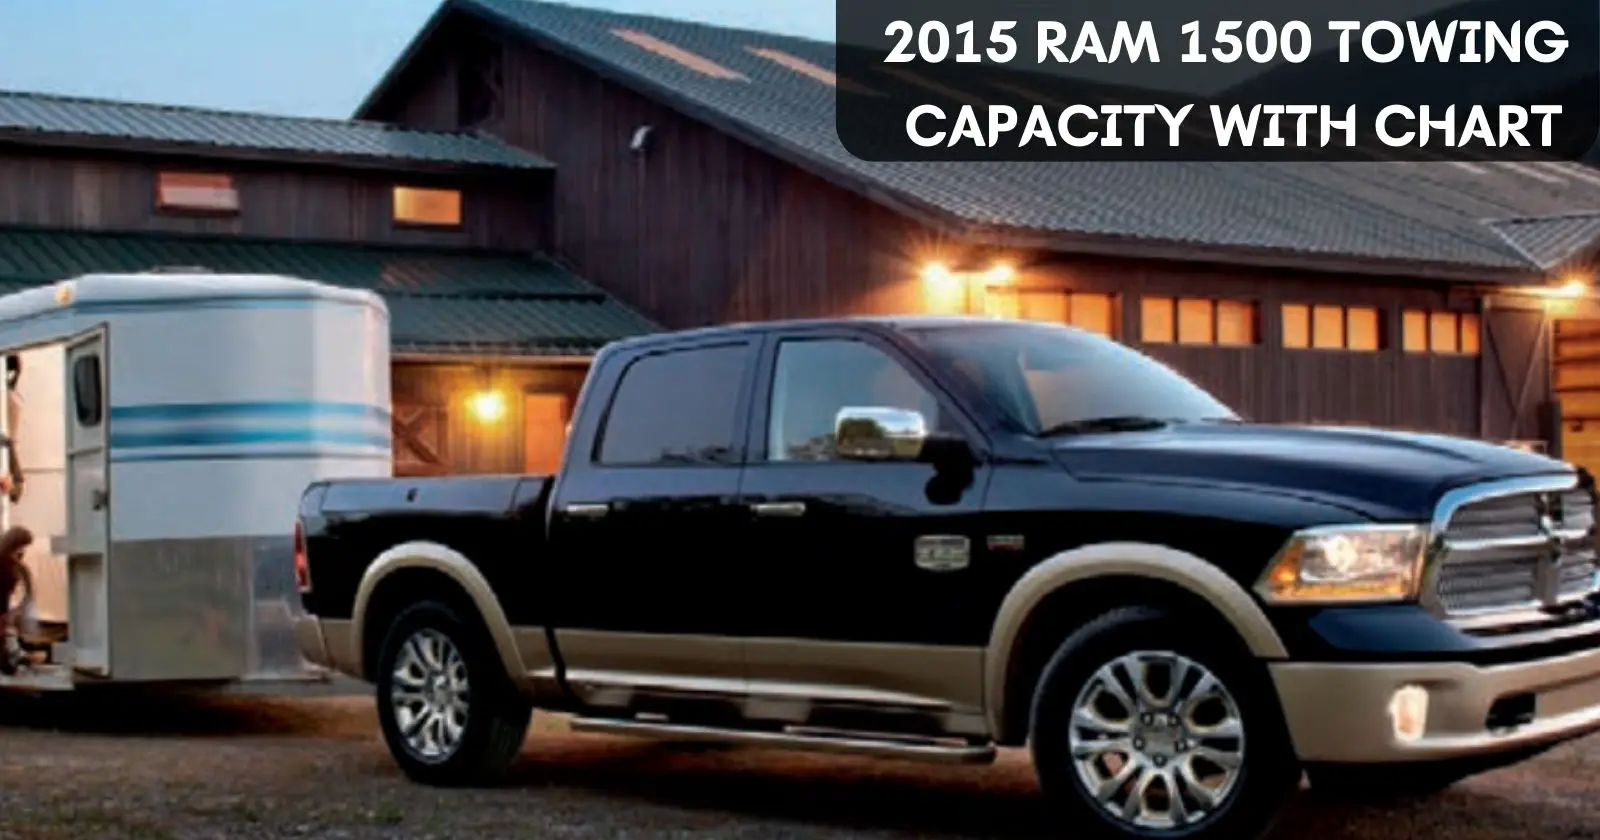 2015-ram-1500-towing-capacity-with-chart-thecartowing